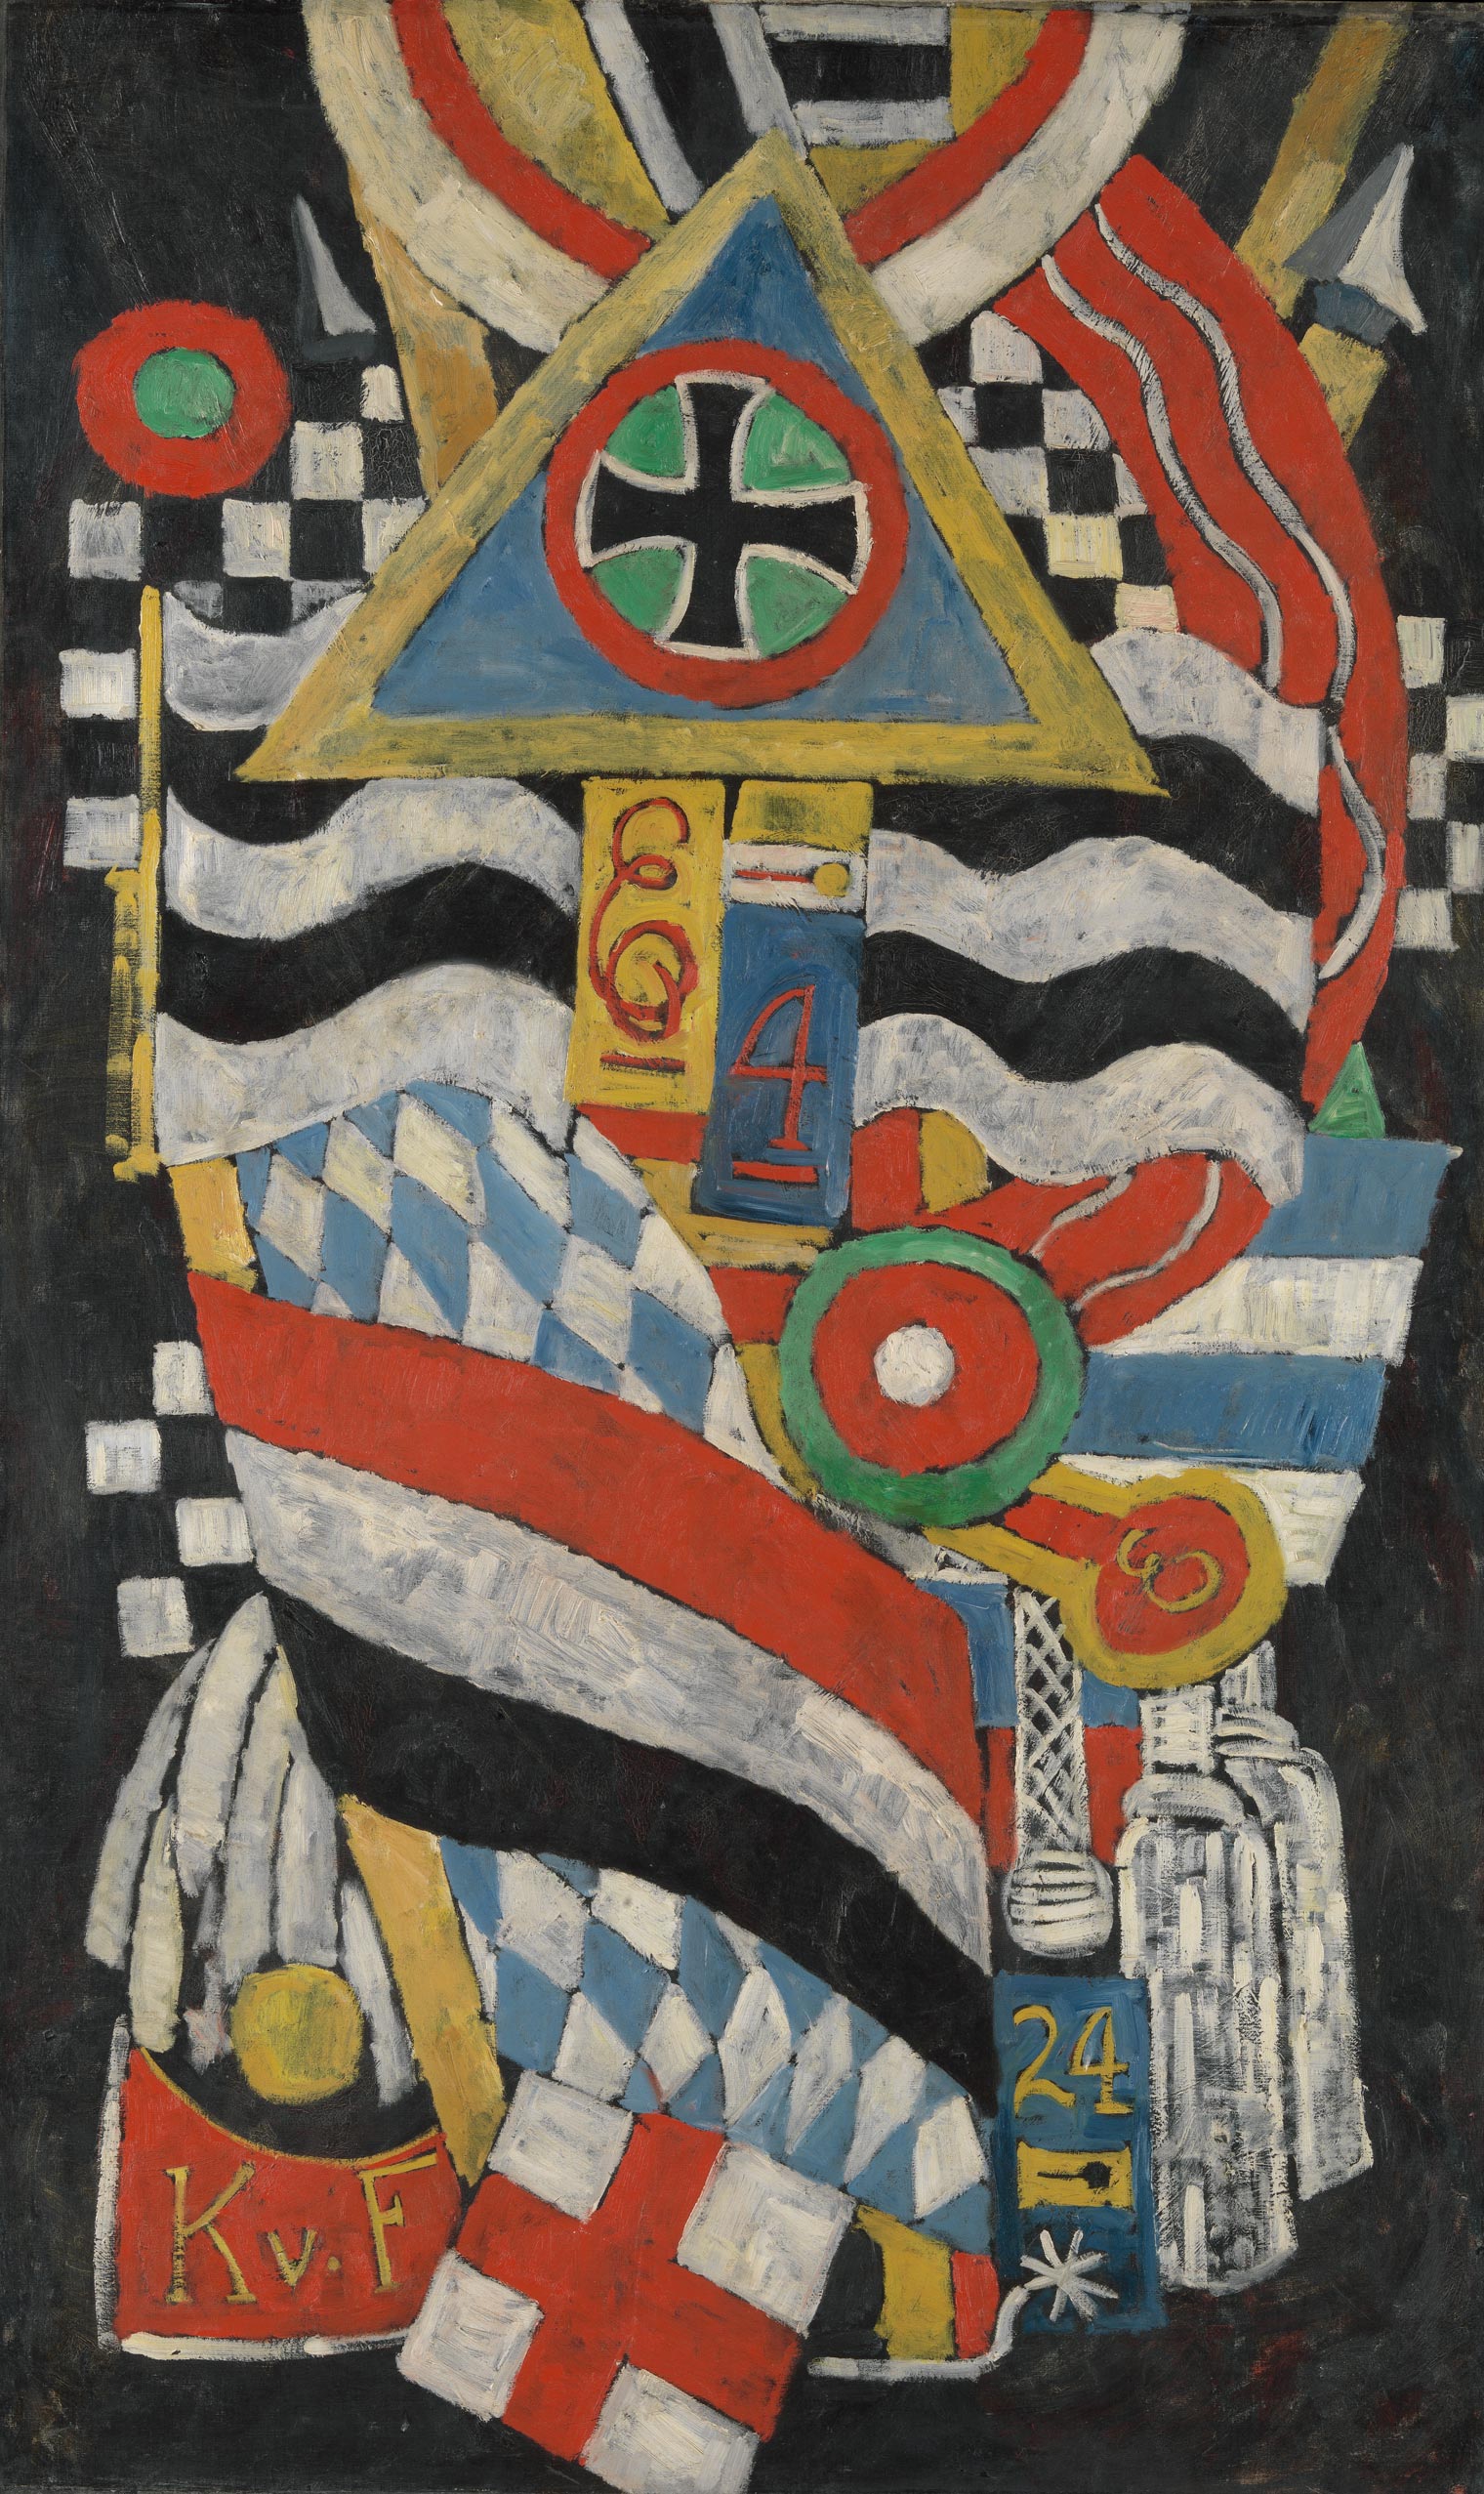 A Cubist/Expressionist painting by Marsden Hartley from his "War Motif" series